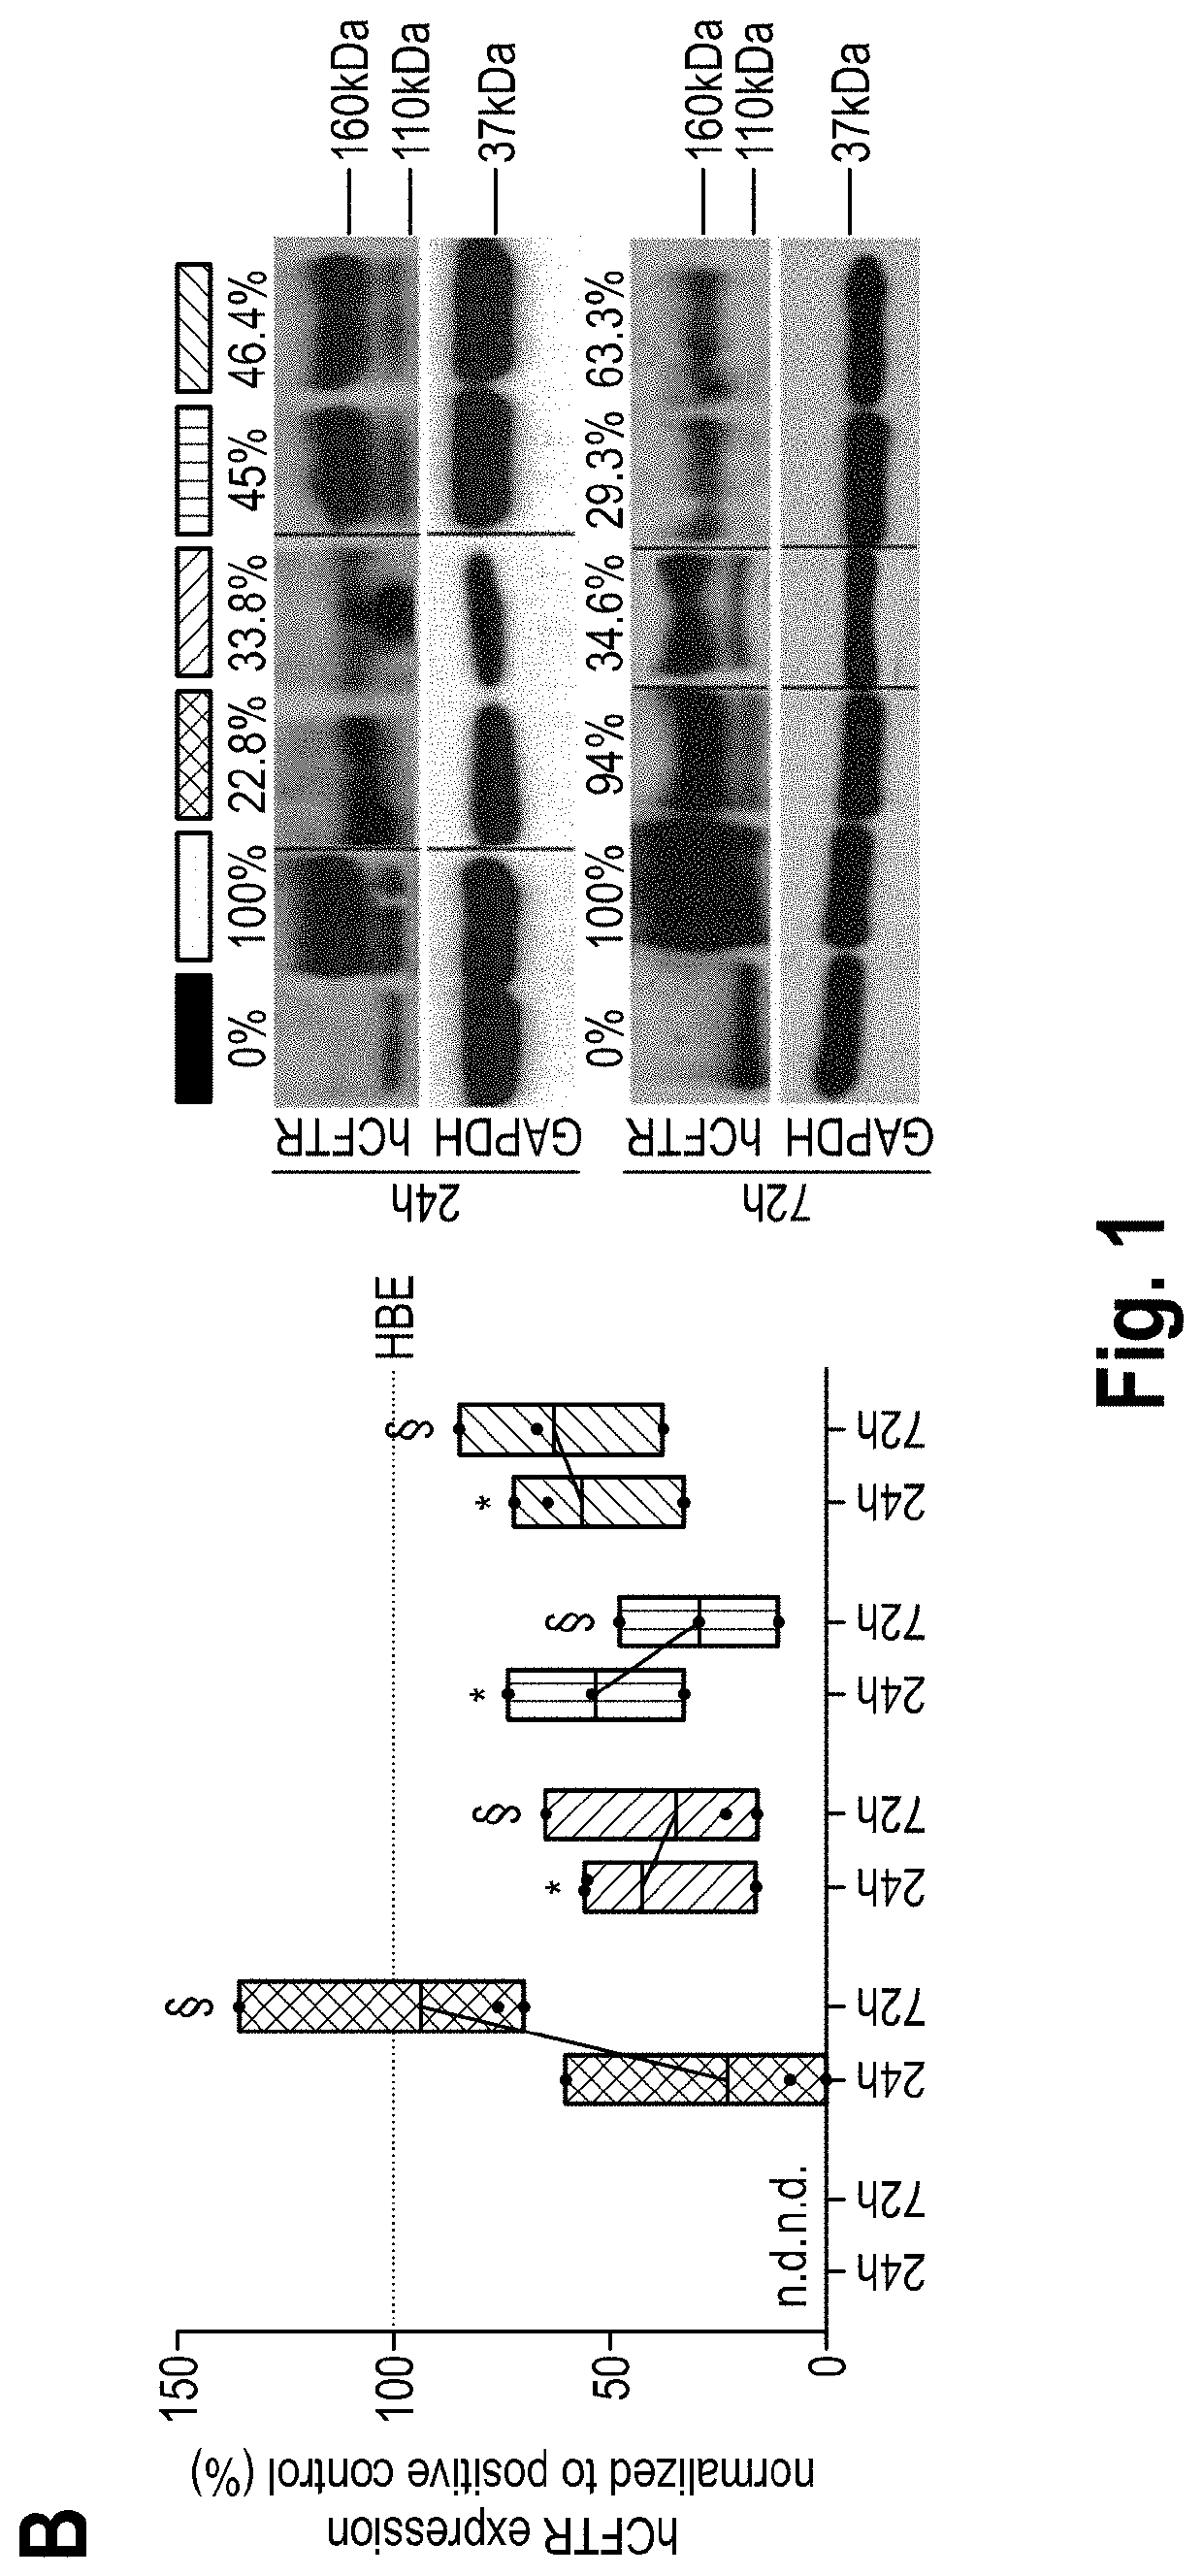 CHEMICALLY MODIFIED mRNA FOR USE IN THE TREATMENT OF A DISEASE ASSOCIATED WITH THE CFTR GENE